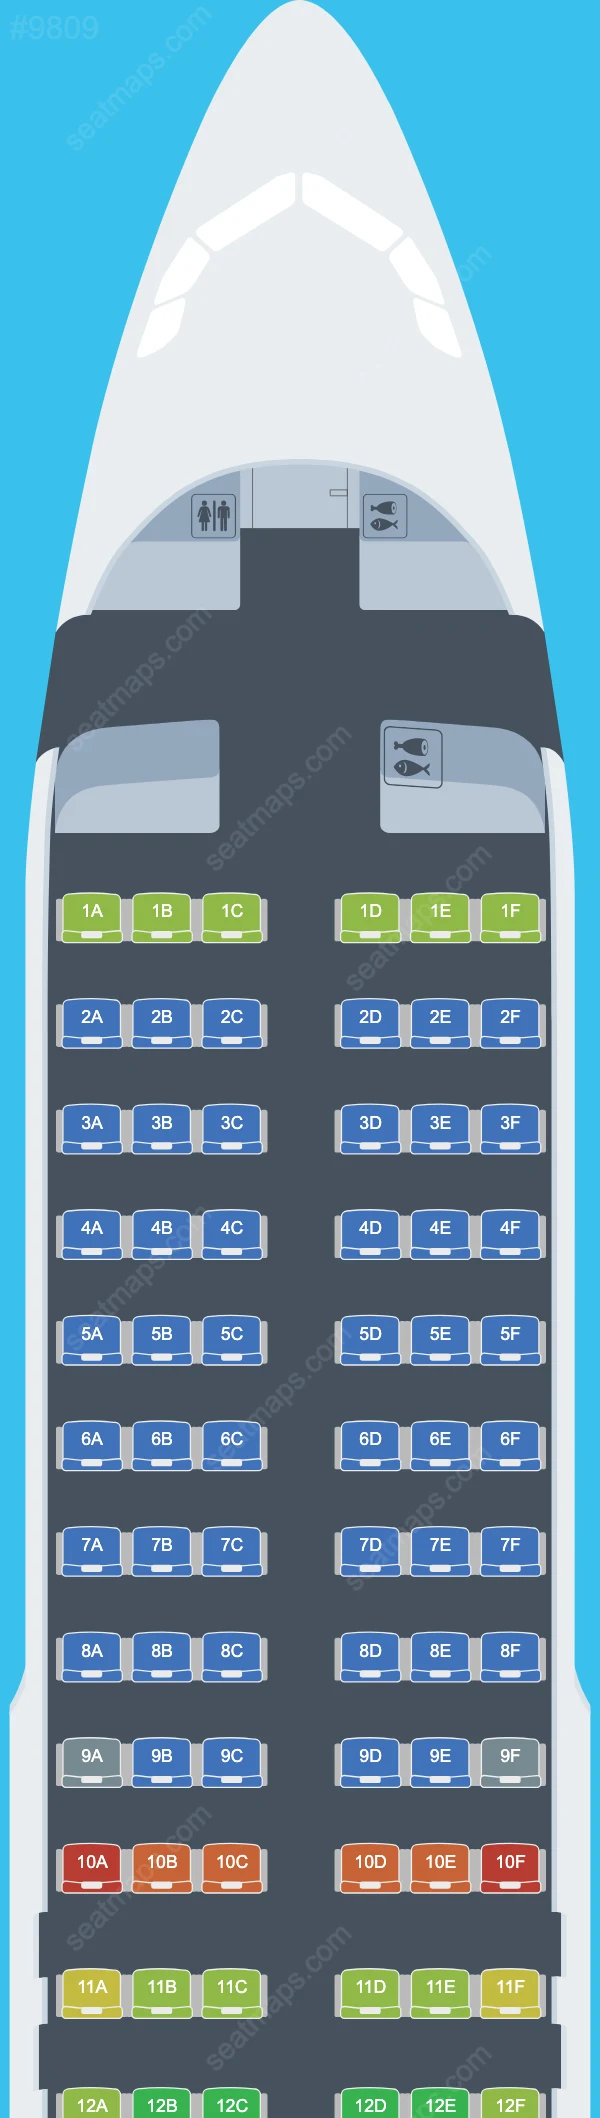 Aegean Airlines Airbus A320-200neo seatmap mobile preview